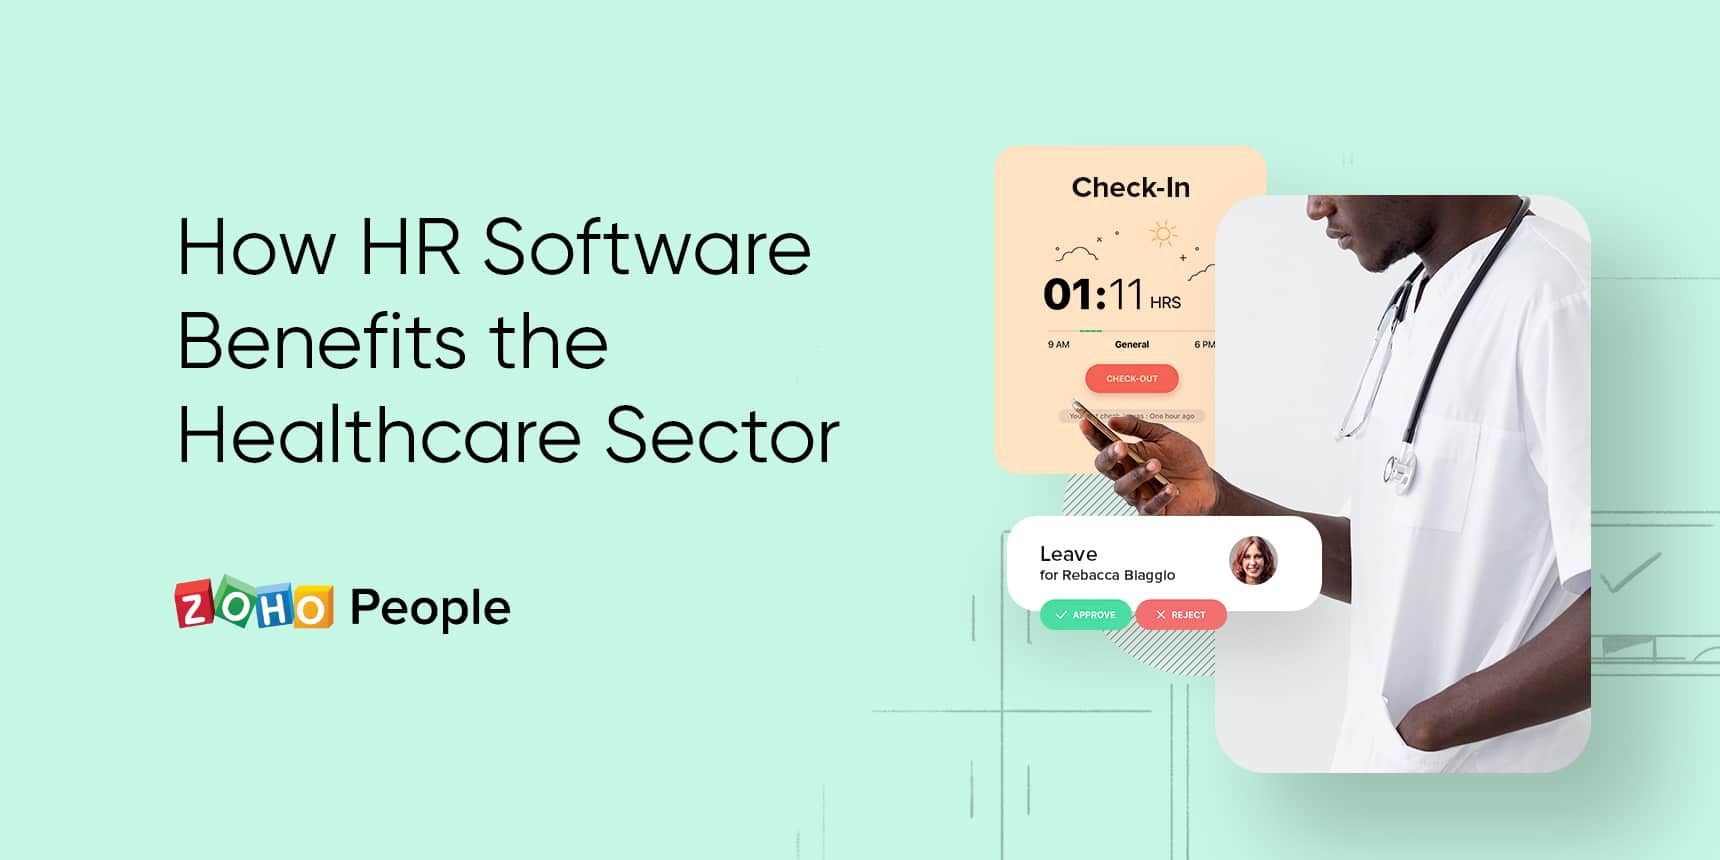 HR software for healthcare sector